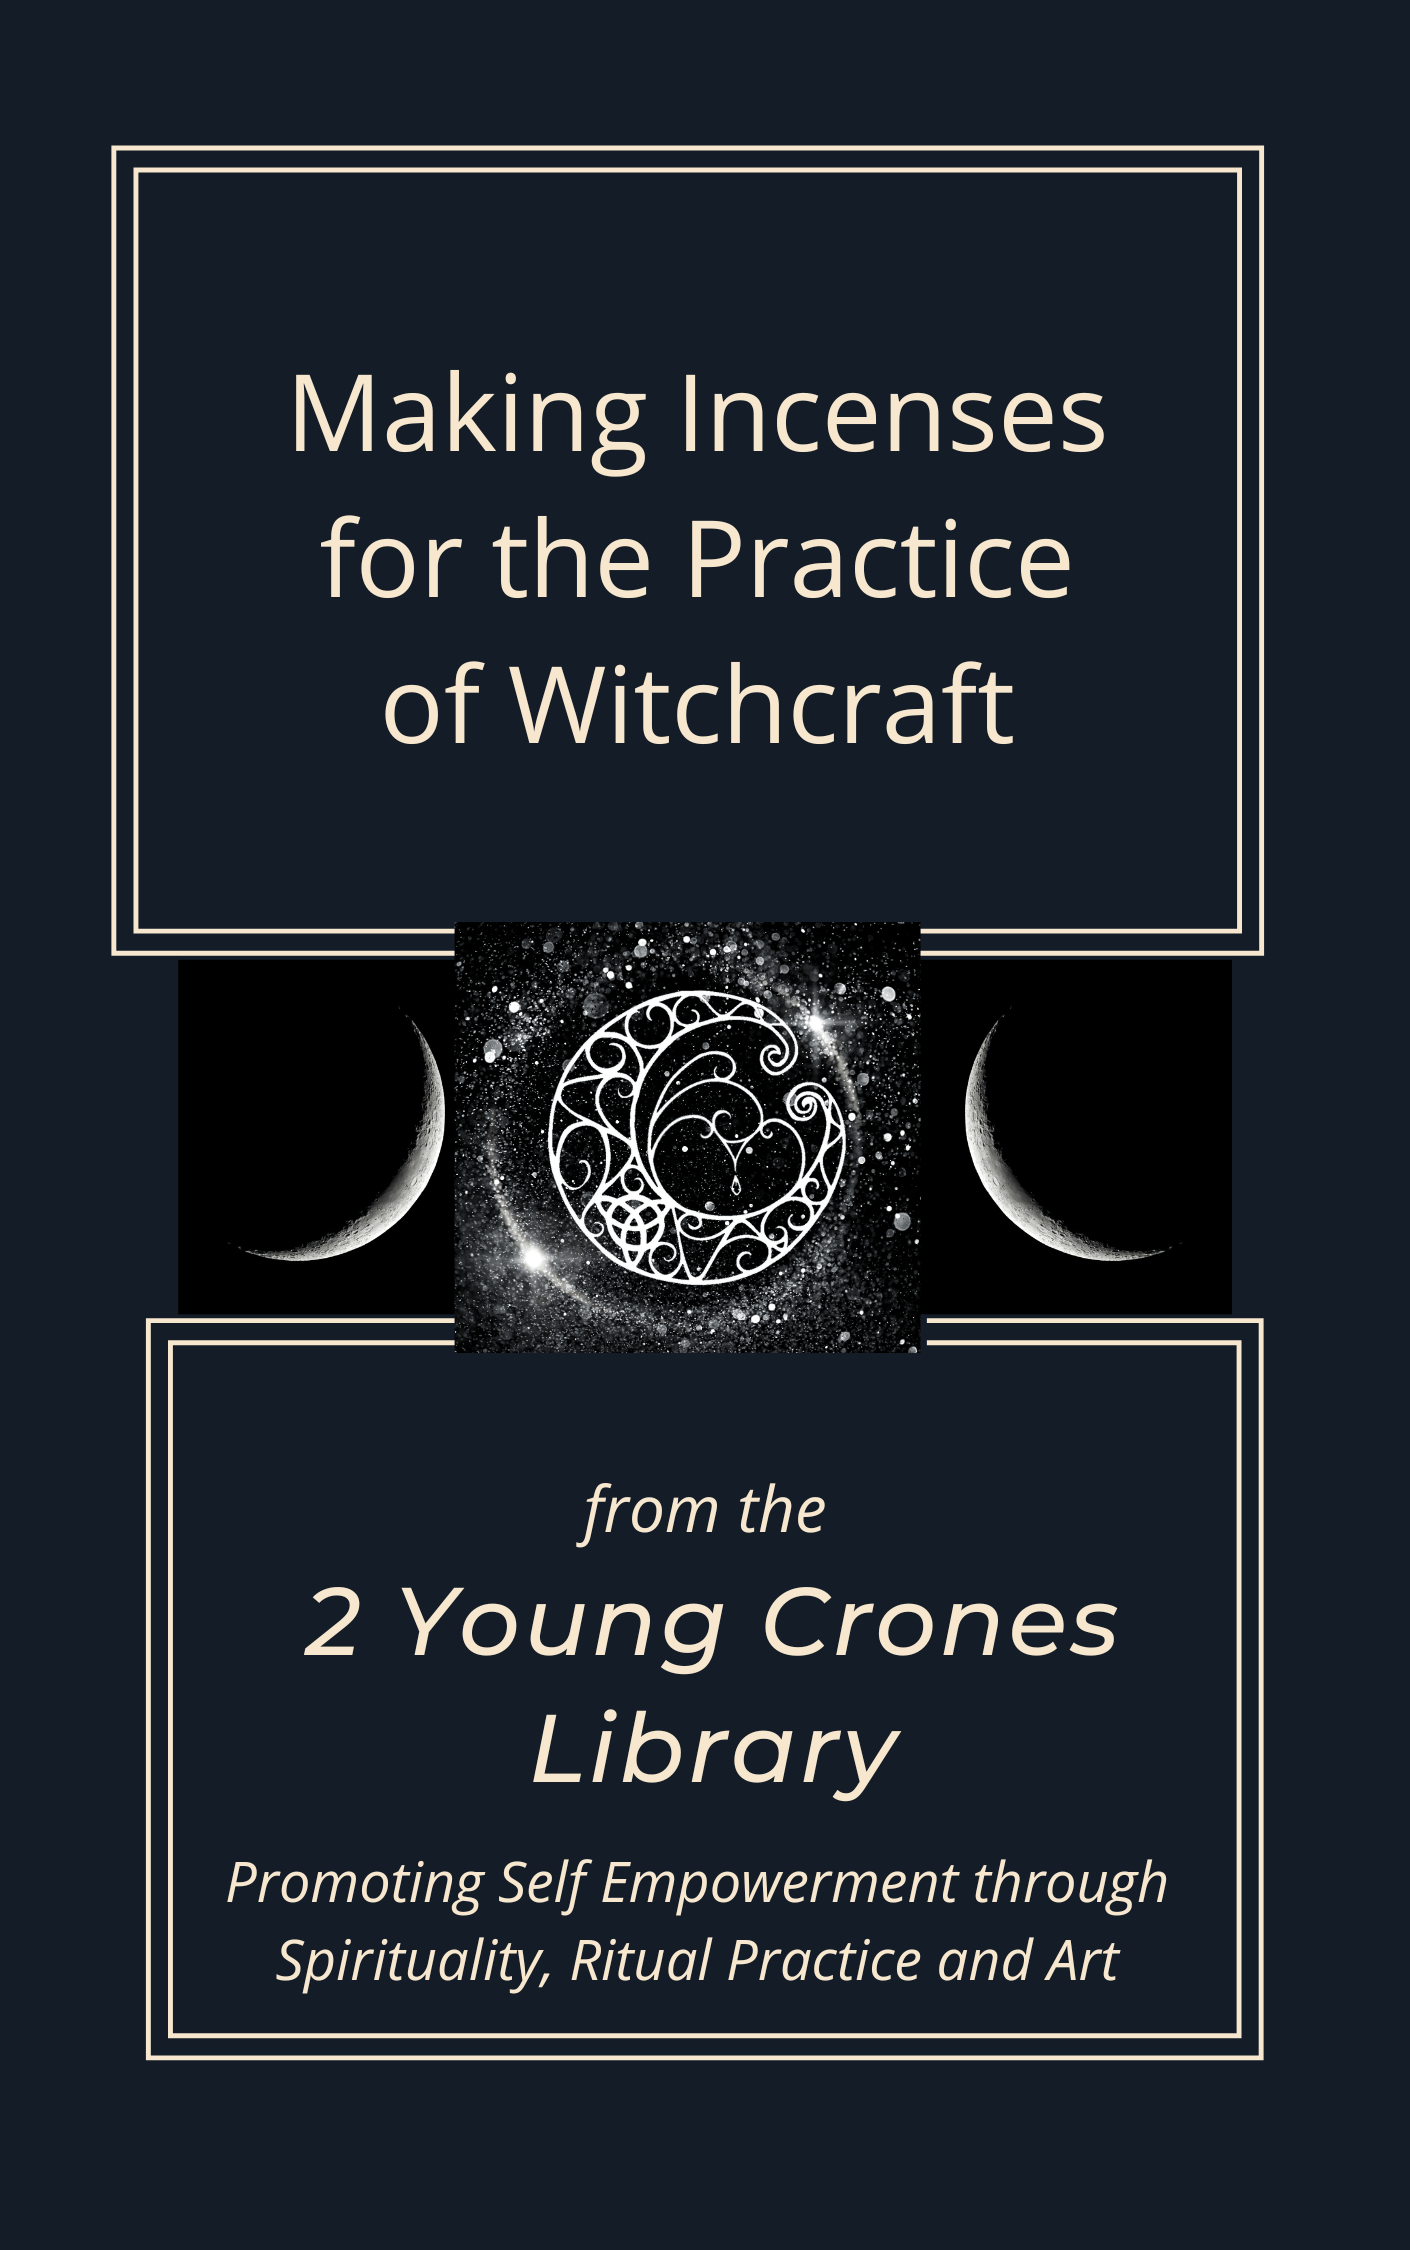 Making Incenses for the Practice of Witchcraft